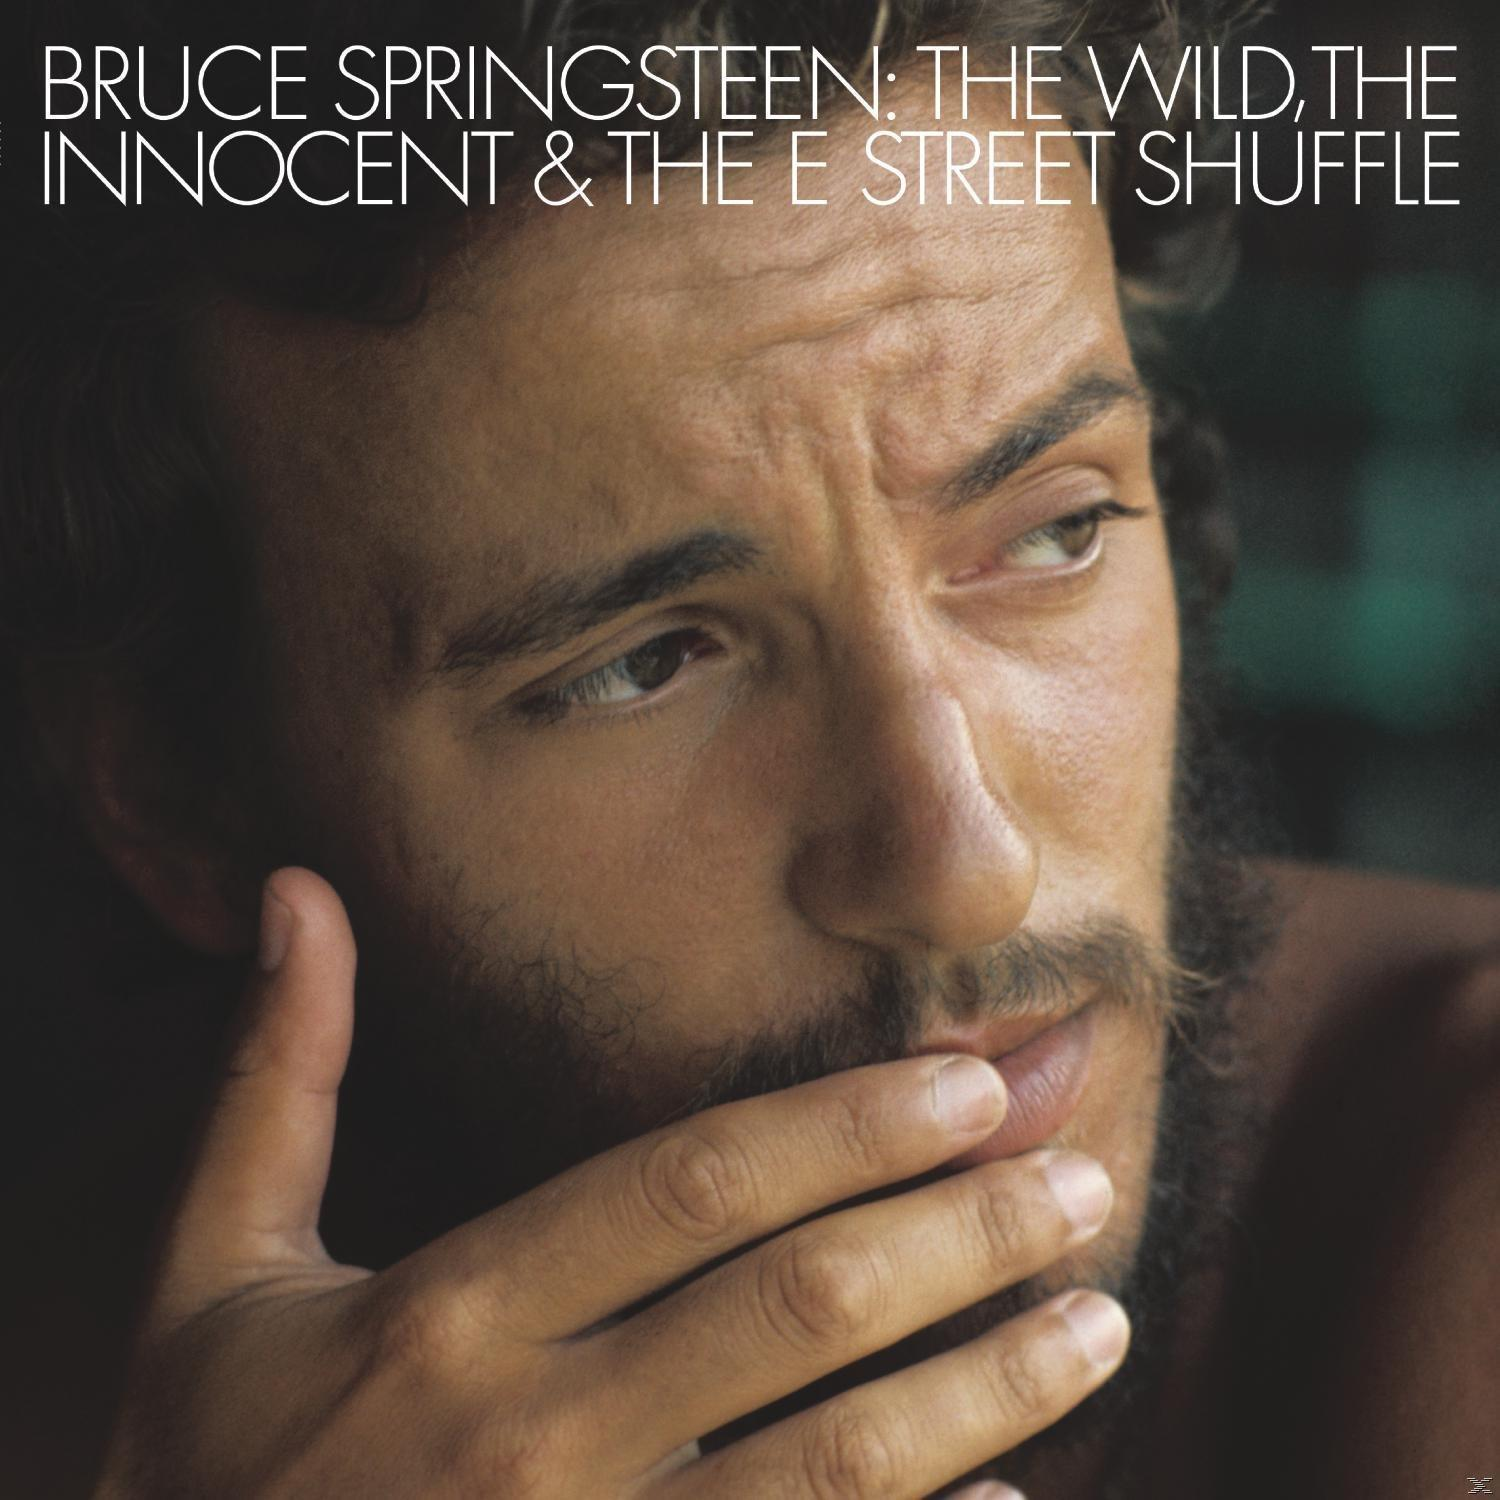 - (Vinyl) Innocent The And E Shuffle Wild, Street The Springsteen Bruce - The